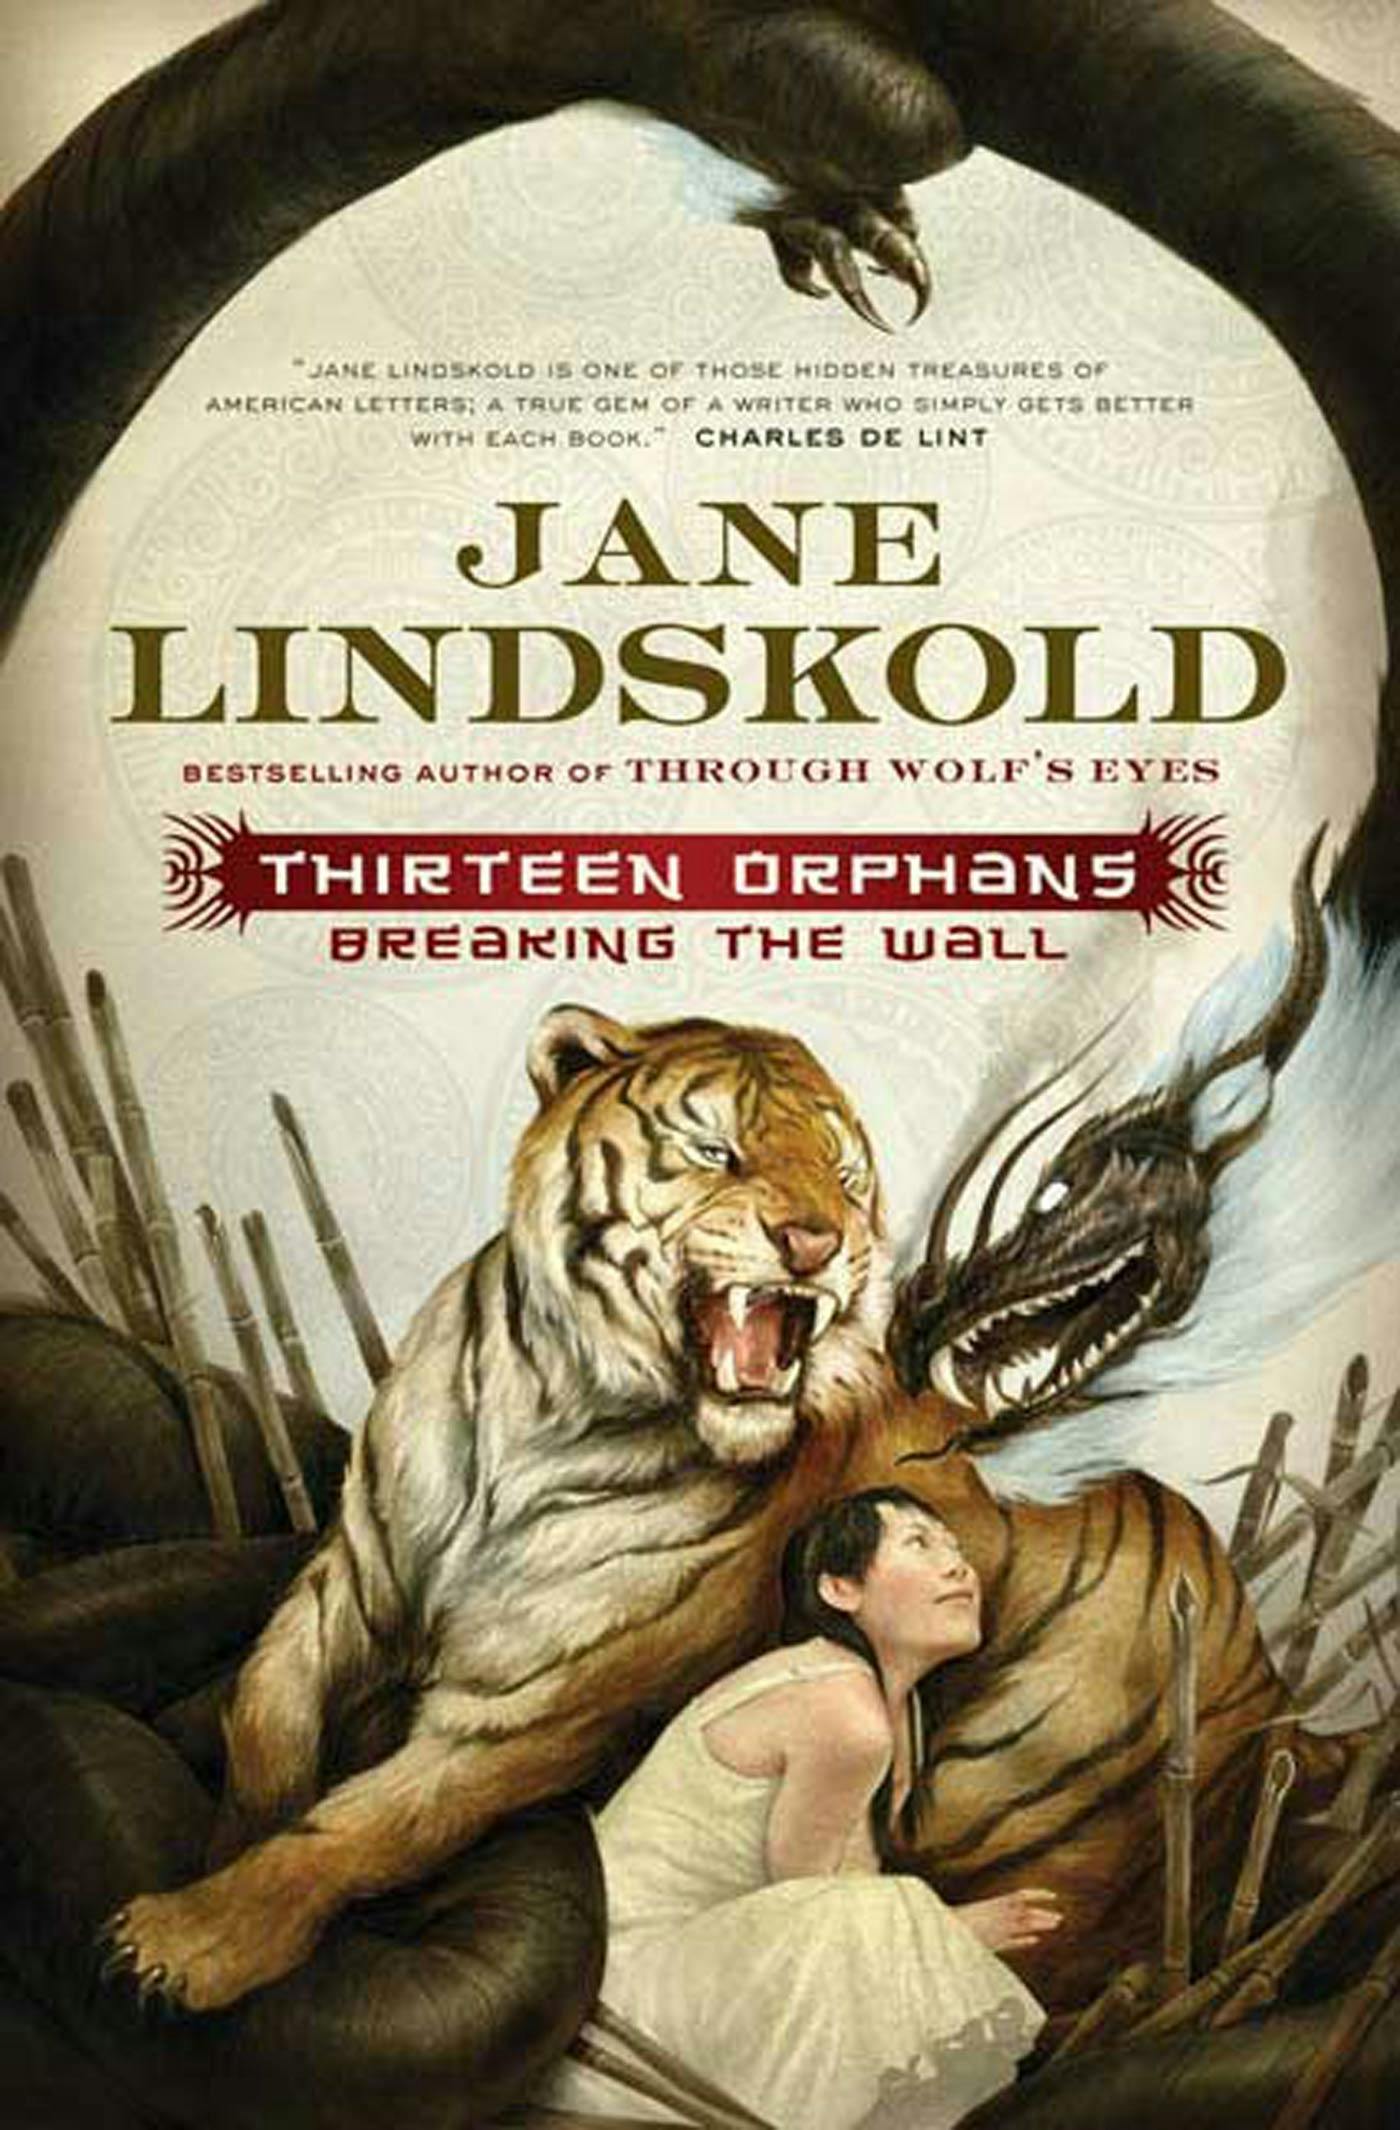 Cover for the book titled as: Thirteen Orphans